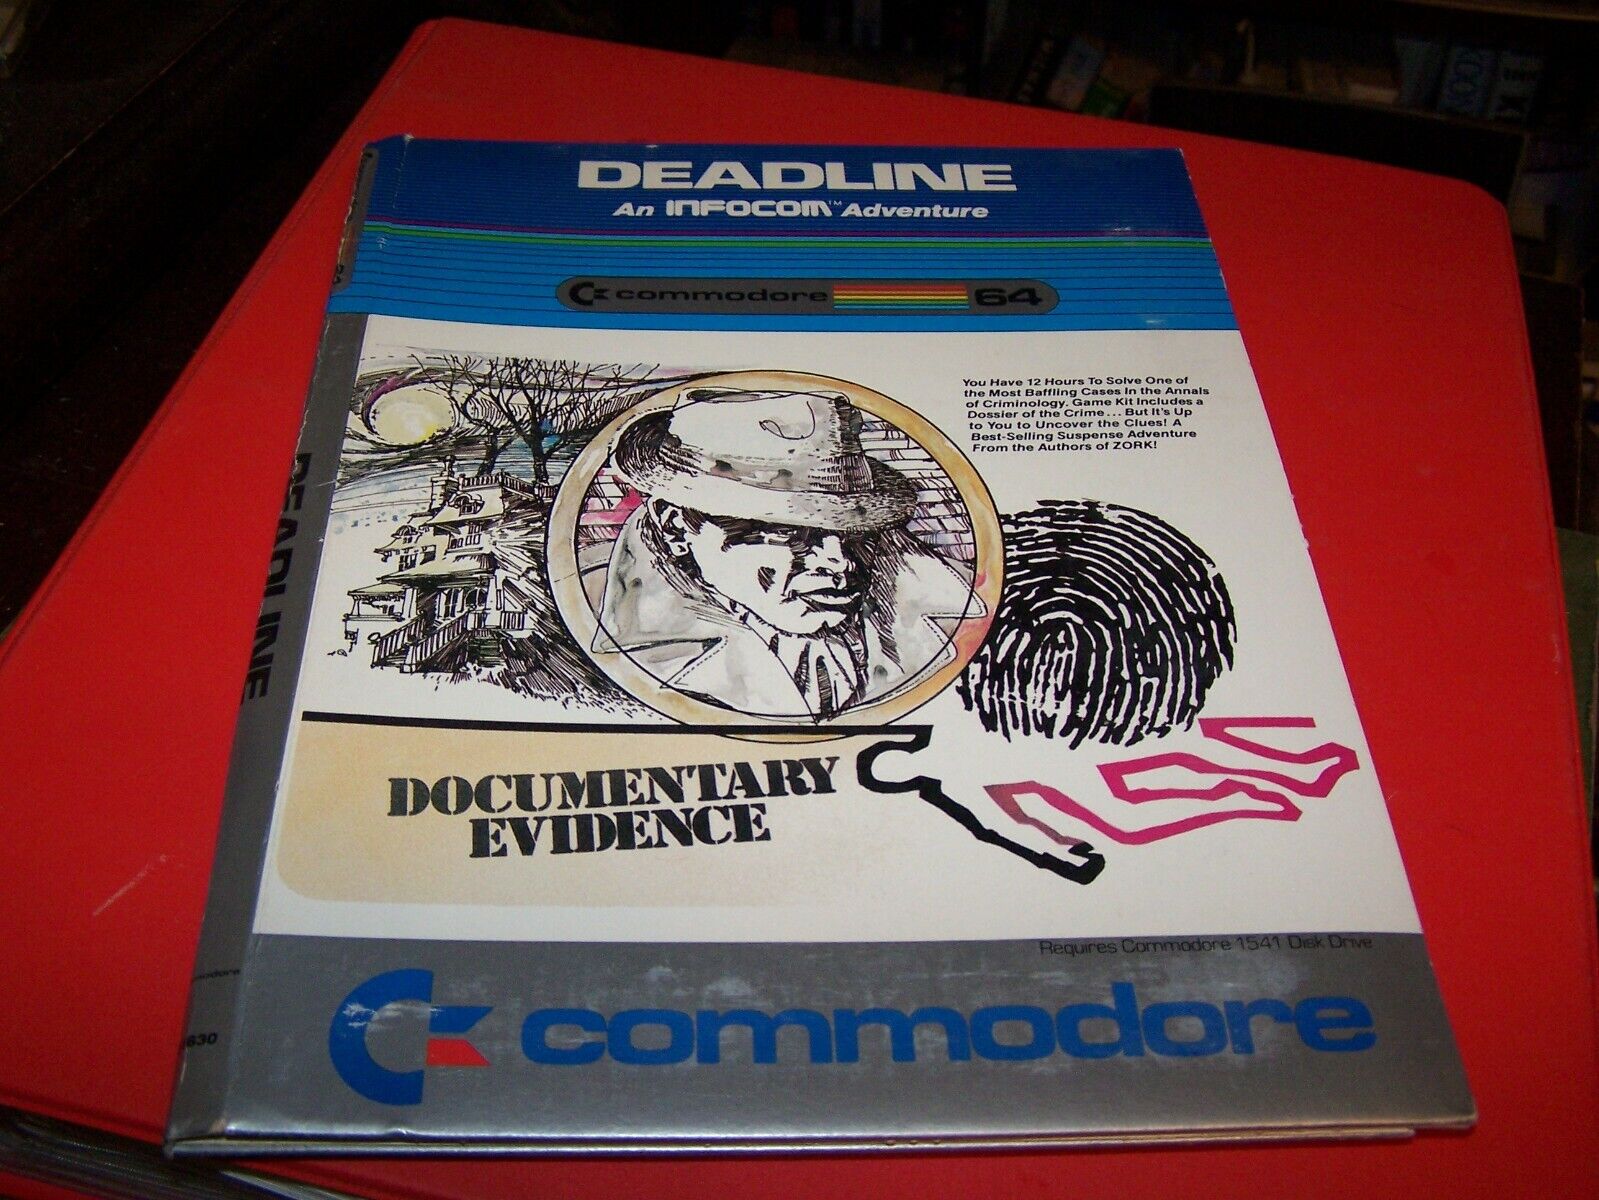 Deadline Adventure Game for Commodore 64 on 5.25 disk